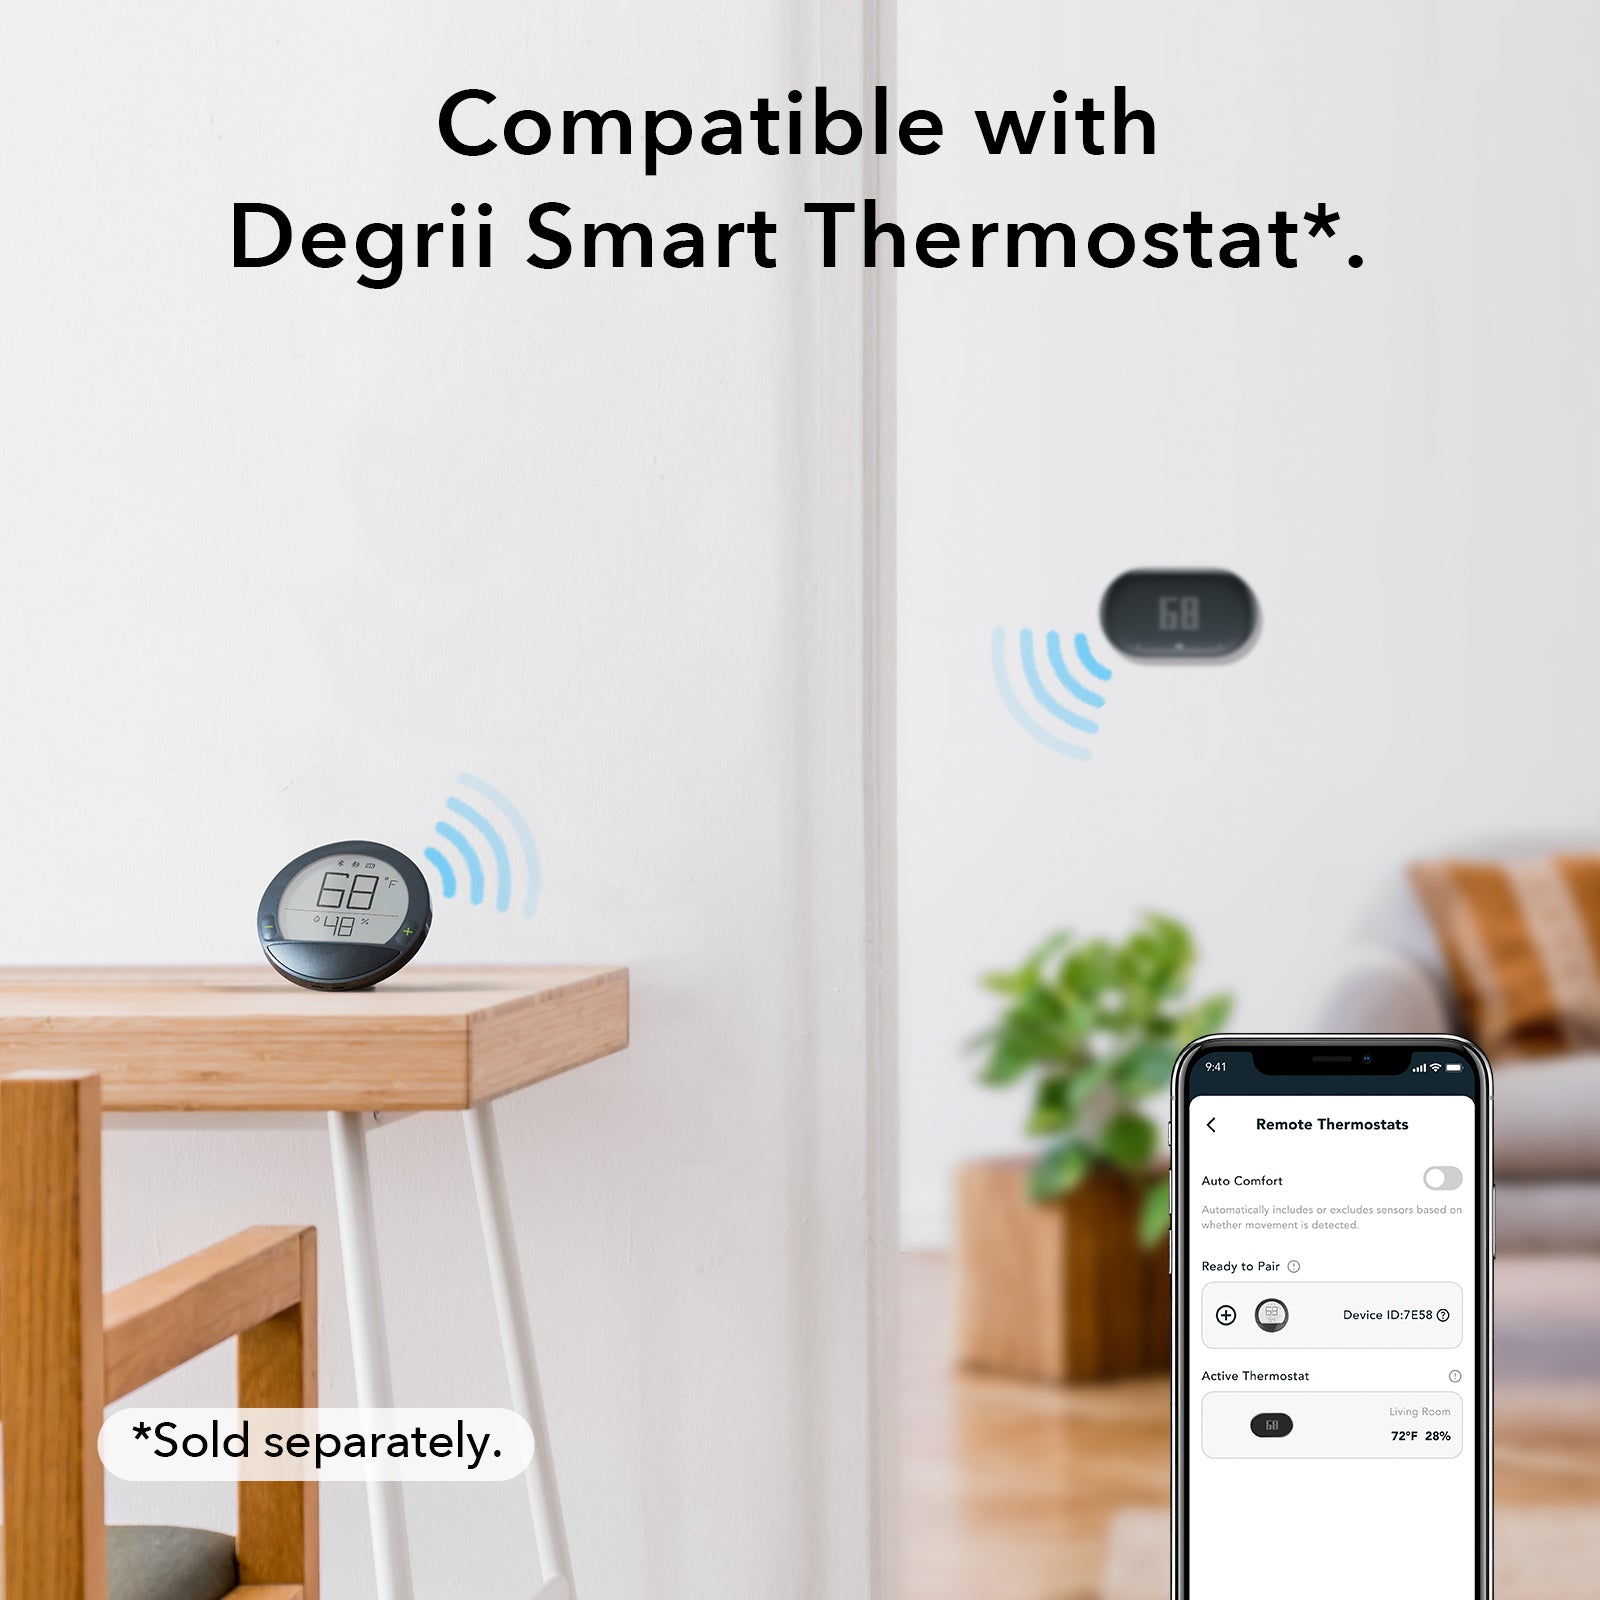 Smart Thermostats Allow Remote Control